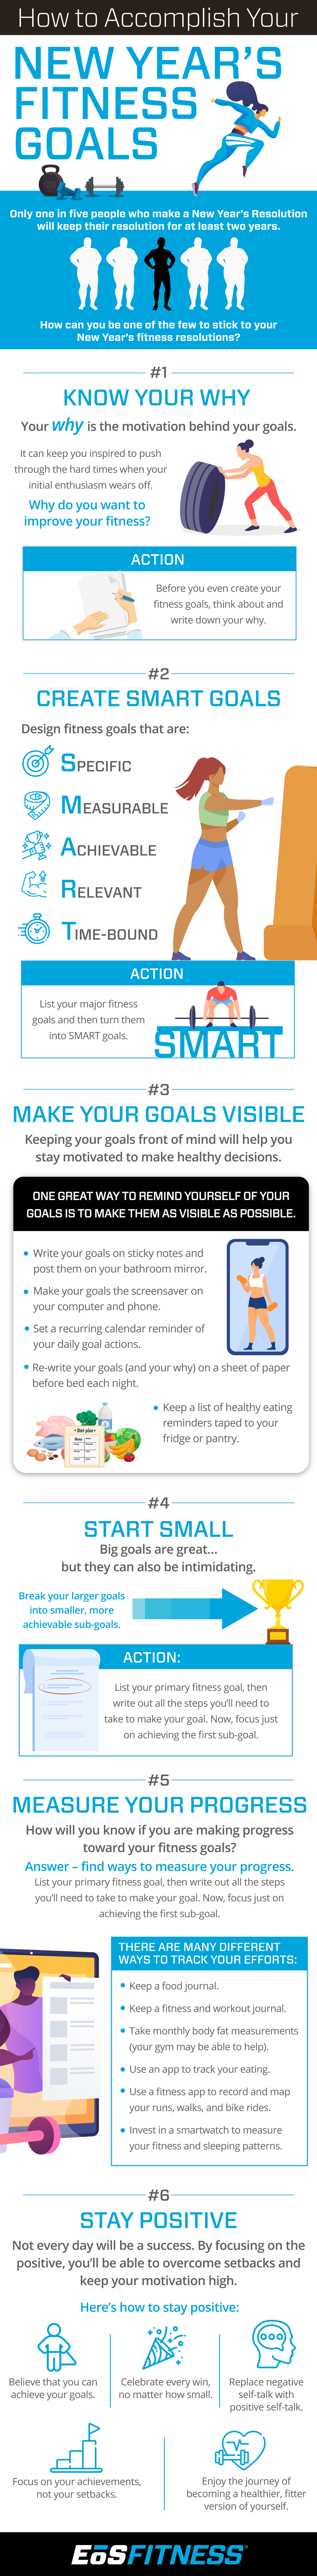 How to accomplish your new years fitness goals. Only one in five people who make a new year's resolution will keep their resolution for at least two years. How can you be one of the few to stick to your New Year's fitness resolution? #1 Know your why. Your 'why' is the motivation behind your goal. It can keep you inspired to push through the hard times when your initial enthusiasm wears off. Why do you want to improve your fitness? Action: before you even create your goals, think about and write down your why. #2 Create SMART goals. S.M.A.R.T. define goals that are Specific, Measurable, Achievable, Relevant, Time-Bound. Action: List your major fitness goals and then turn them into smart goals. #3 Make your goals visible. Keeping your goals front of mind will help you stay motivated to make healthy decisions. One great way to remind yourself of your goals is to make them as visible as possible. - write your goals on sticky notes and post them on the bathroom mirror. - make your goals the screensaver on your computer or phone. - Set a reoccurring calendar reminder of your daily goal actions. - Re-write your goals (and your why) on a sheet of paper before bed each night. - Keep a list of healthy eating reminders taped to your fridge of pantry.#4 Start small: Big goals are great... but they can also be intimidating. Break down your larger goals into smaller, more achievable sub-goals. Action: List your primary fitness goal, then write out all the steps you'll need to make your goal. Now focus just on achieving your sub-goal. #5 Measure your progress: How will you know if you're making progress towards your fitness goal? Answer- find ways to measure your progress. There are many different ways to track your progress. - Keep a food journal. - keep a fitness and workout journal. - take monthly body fat measurements (your gym may be able to help too). - Use an app to track your eating. - use a fitness app to record and map your runs, walks, and bike rides.- Invest in a smartwatch to measure your workouts and sleeping patterns. #6 Stay Positive: Not everyday will be a success. By focusing on the positive you'll be able to overcome setbacks and keep your motivation high. Here's how to stay positive: believe that you can achieve your goals, celebrate every win no matter how small, replace negative small-talk with positive small-talk, focus on your achievements not your setbacks, enjoy the journey of becoming a fitter healthier version of yourself.